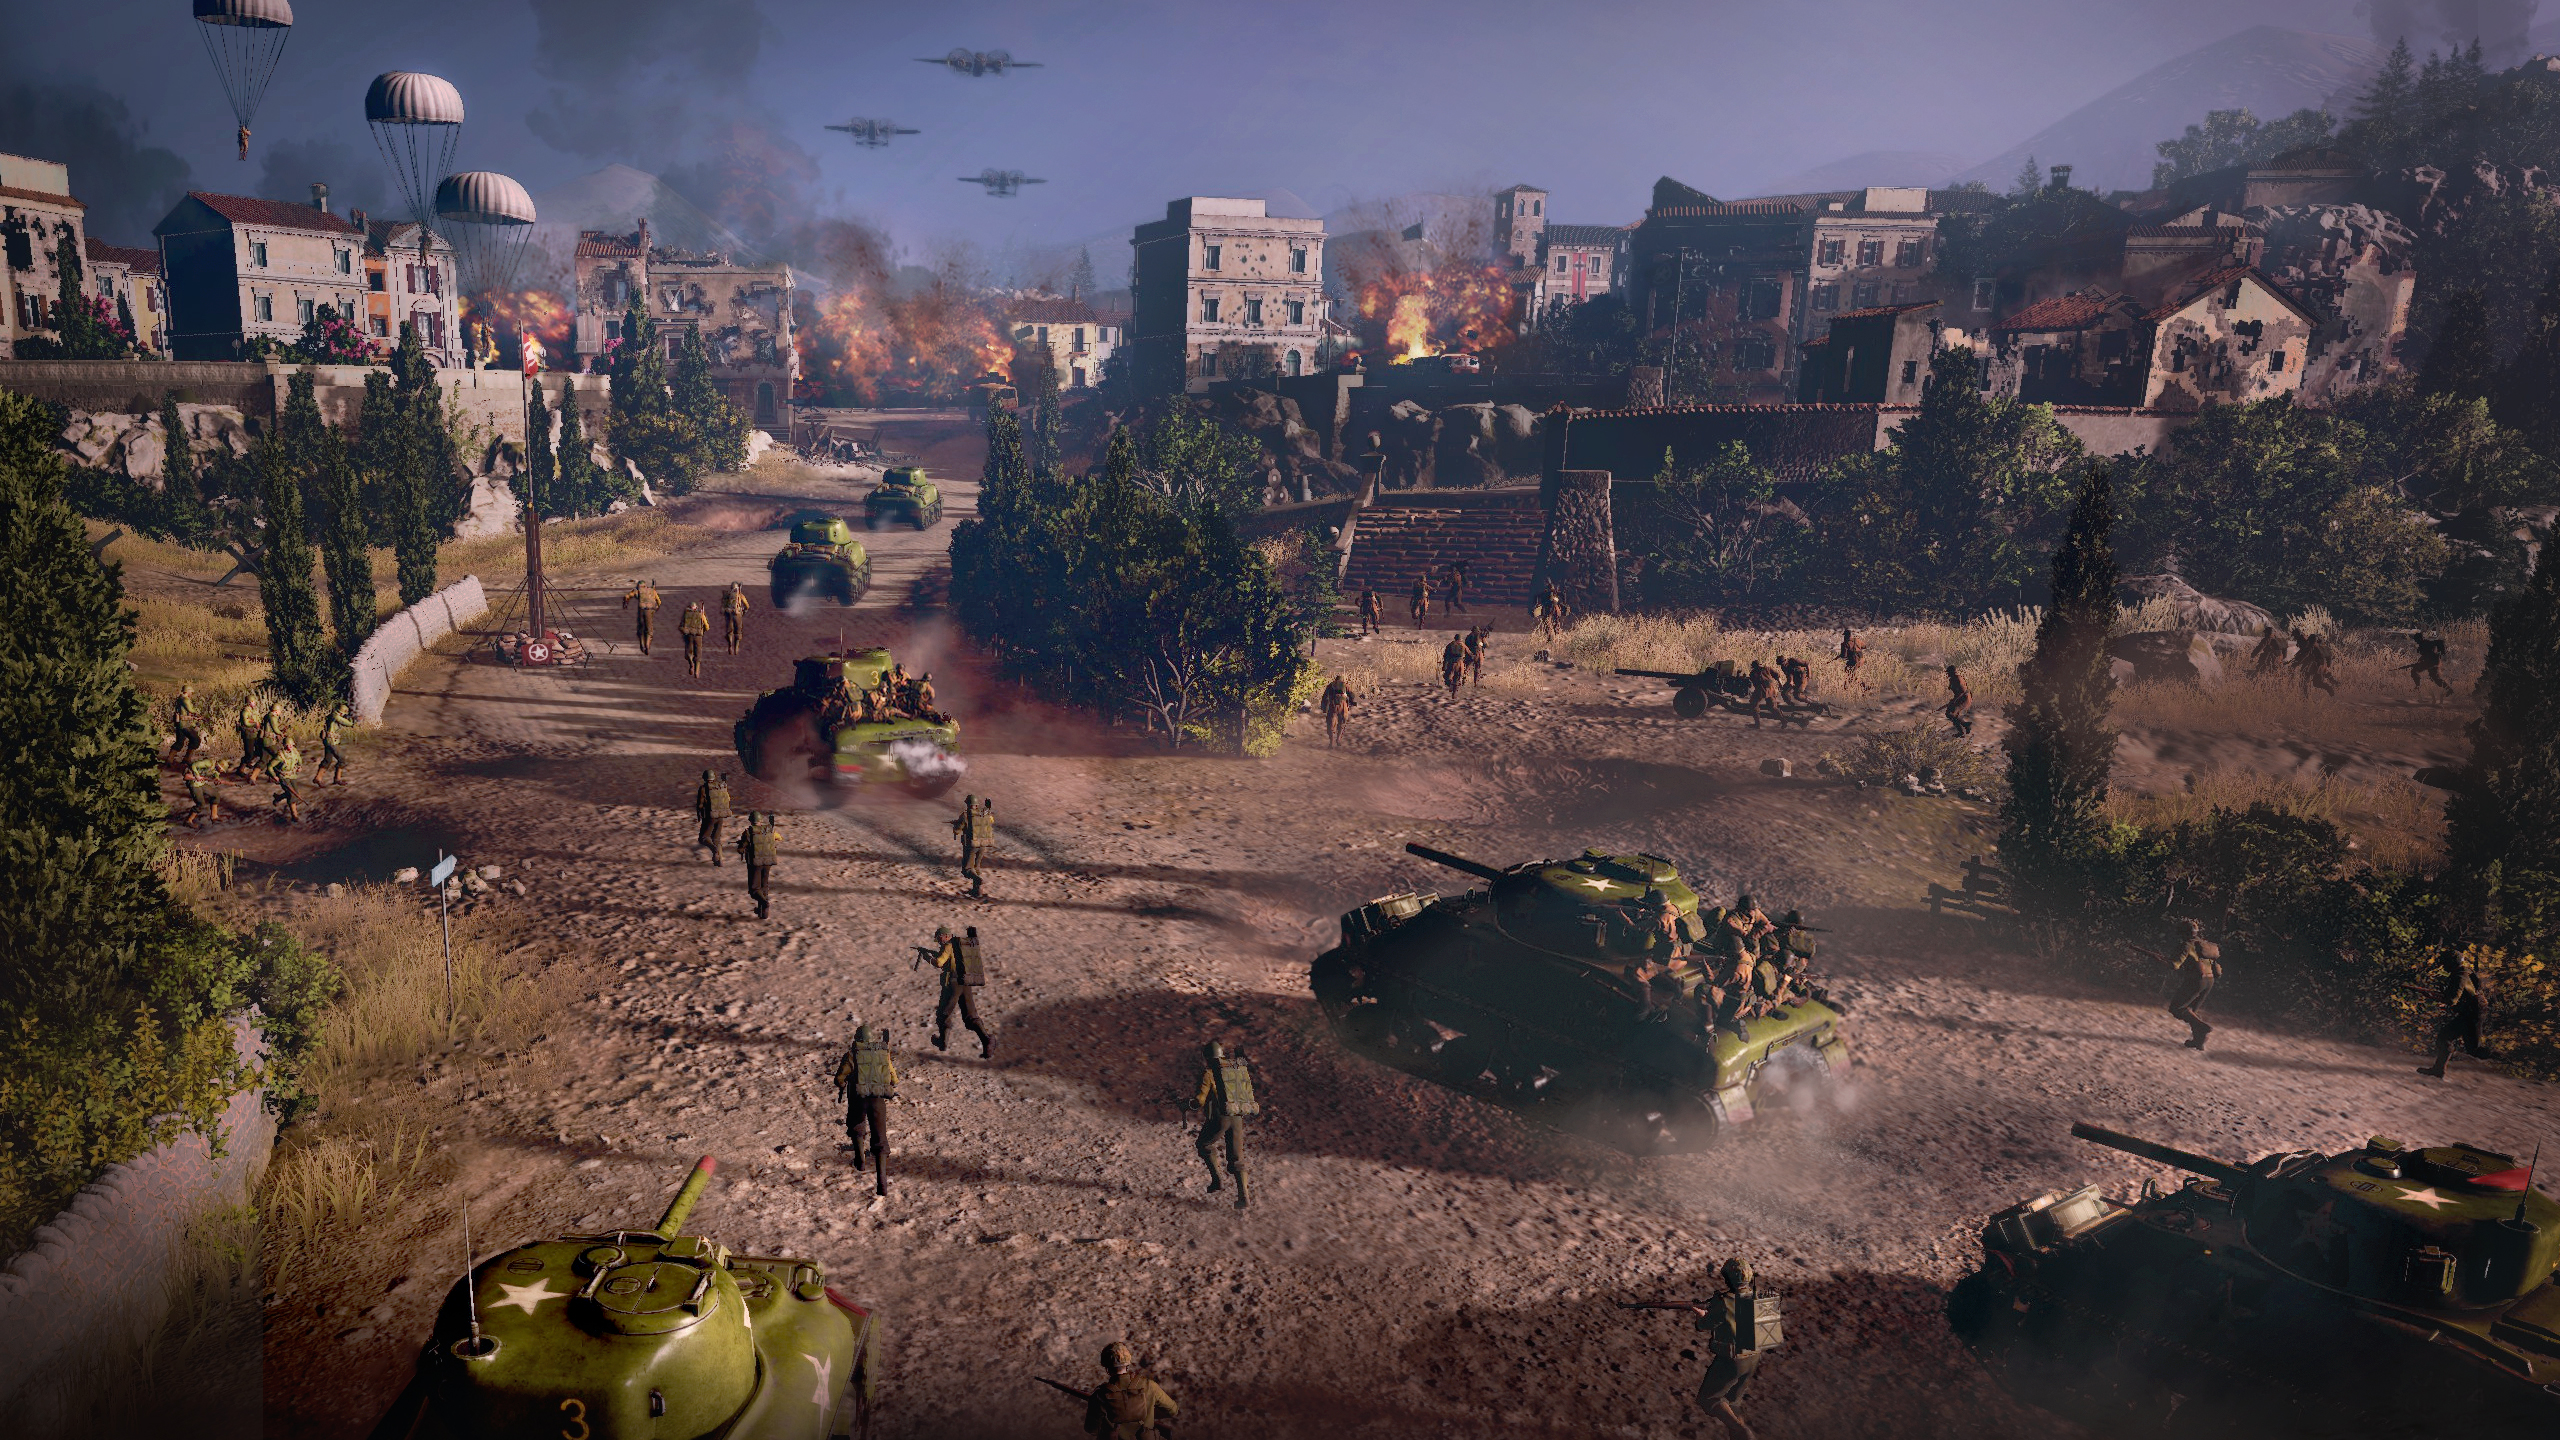 Company of Heroes 3 tanks roll into town